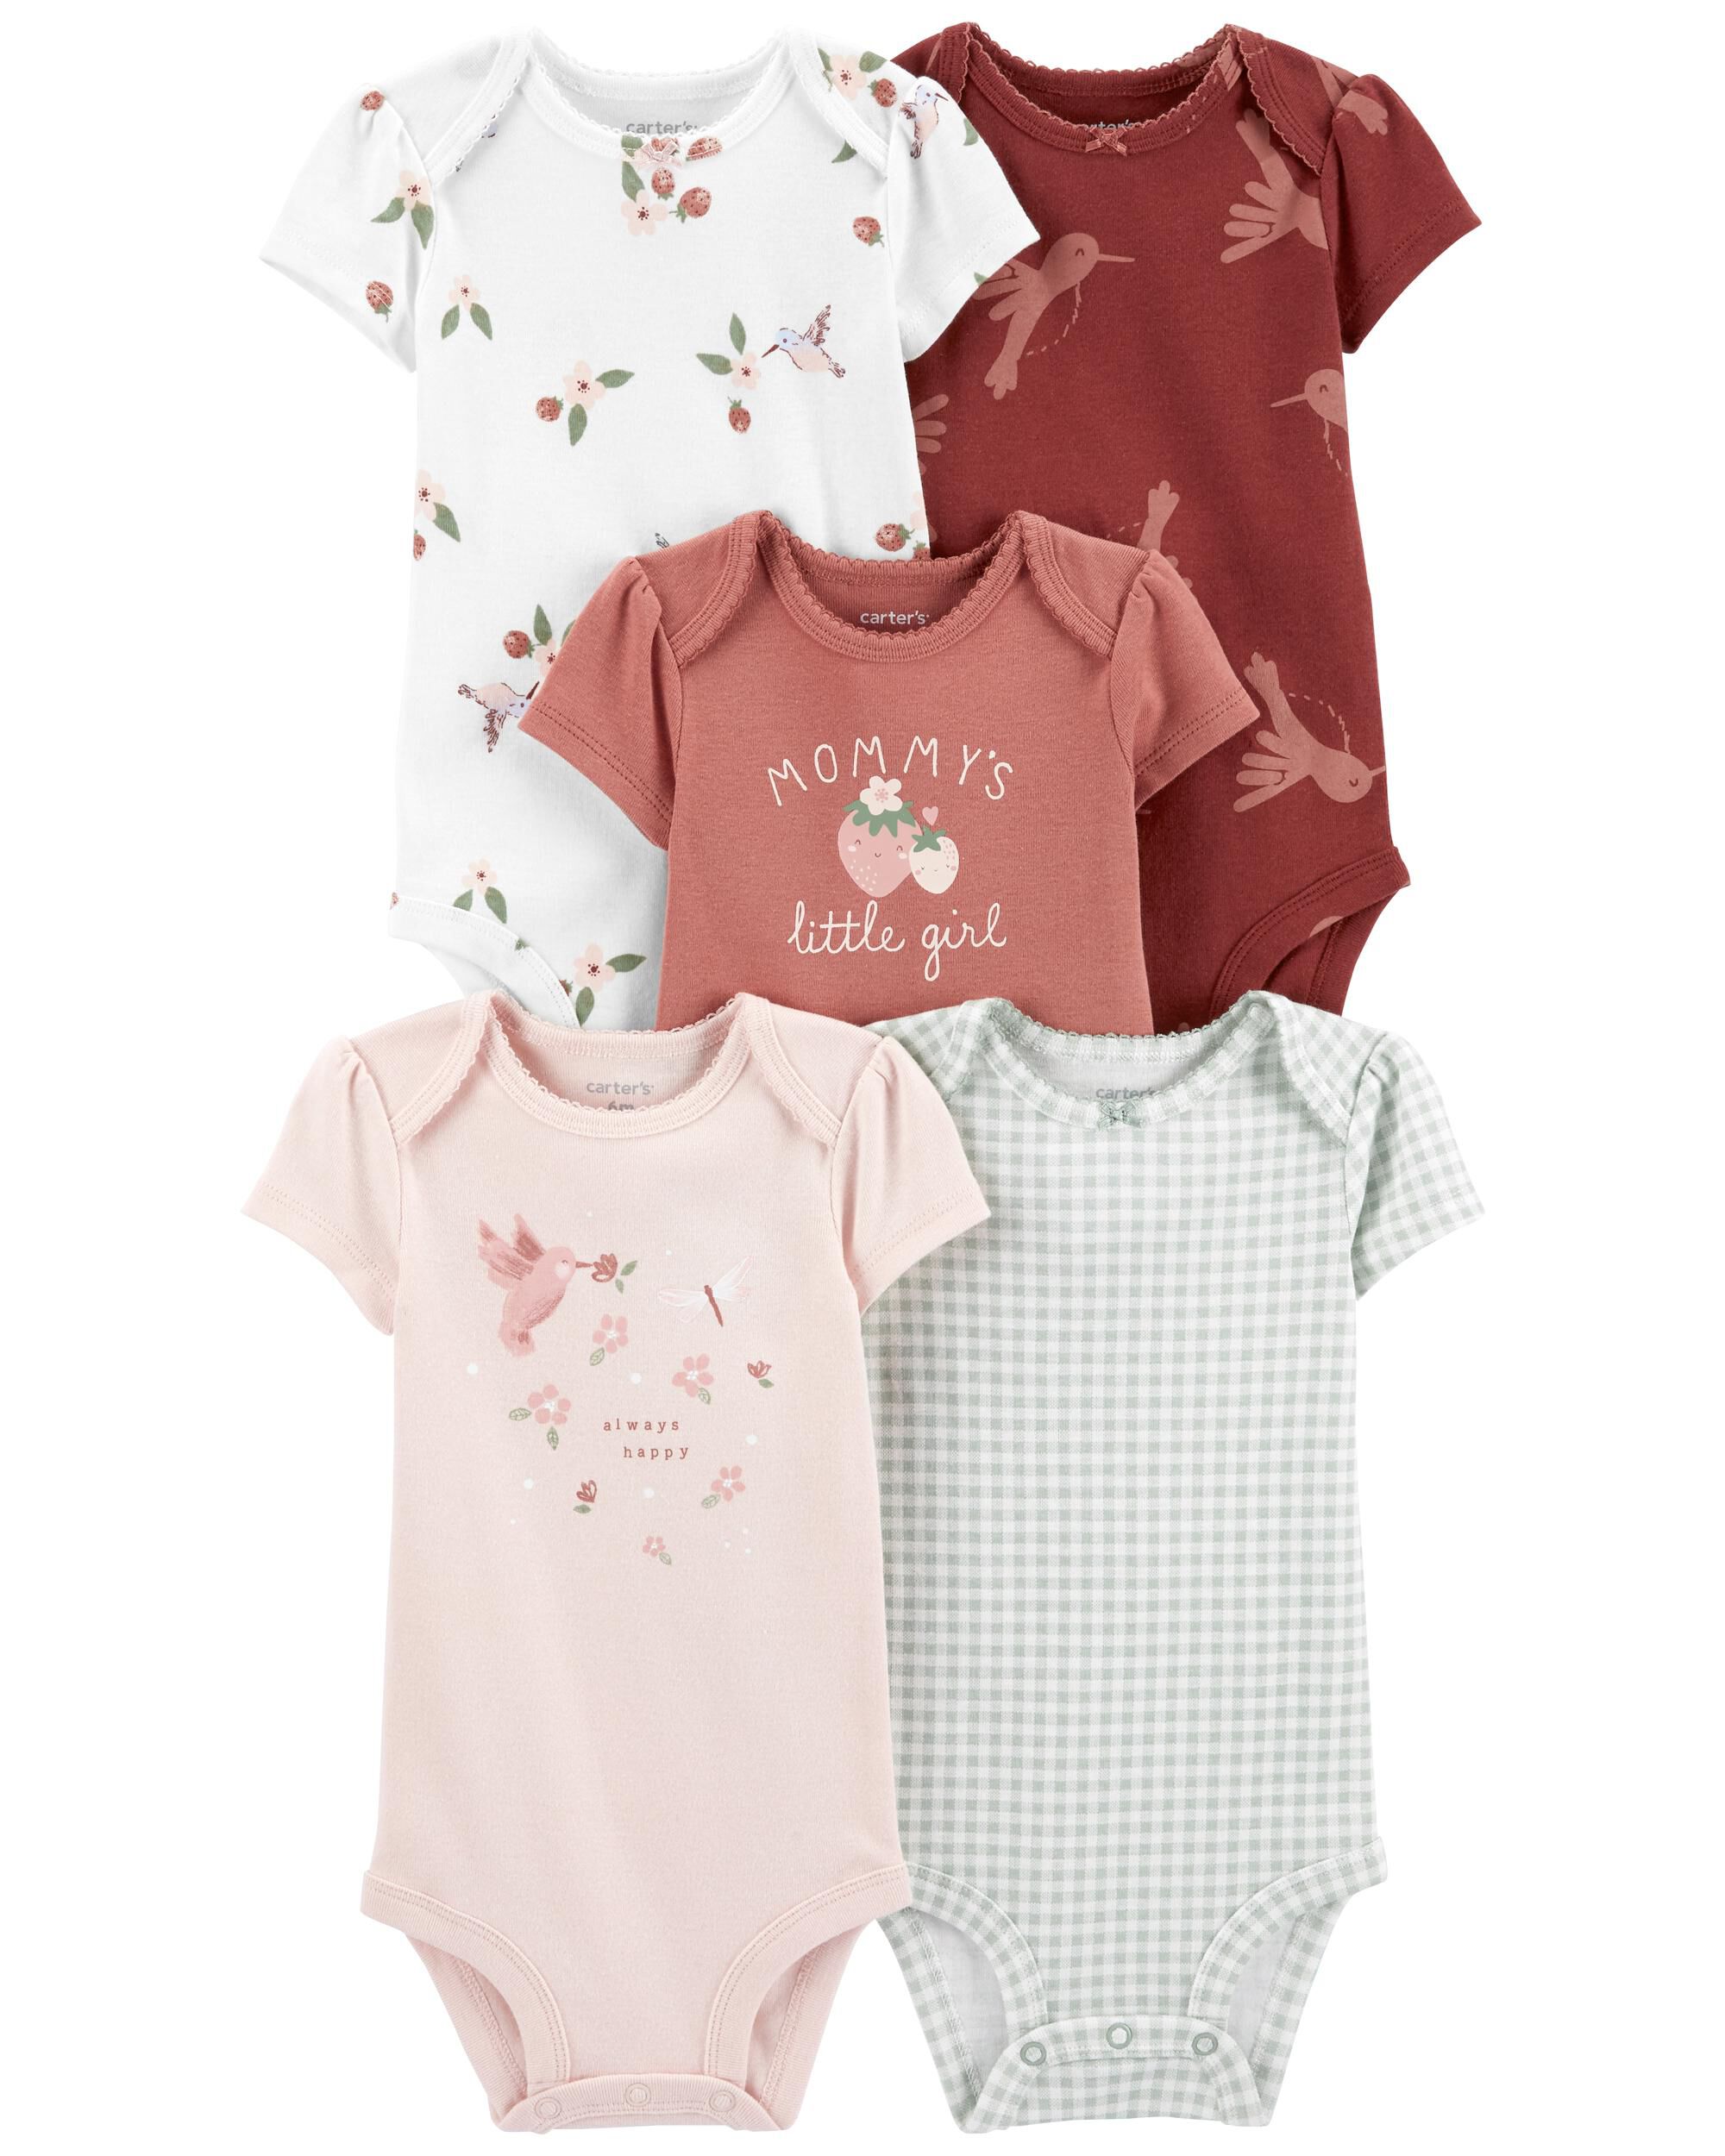 CARTER'S BABY GIRLS BEST CHRISTMAS EVER BODY SUIT & PANTS SET SIZE 6M 12M 18M 